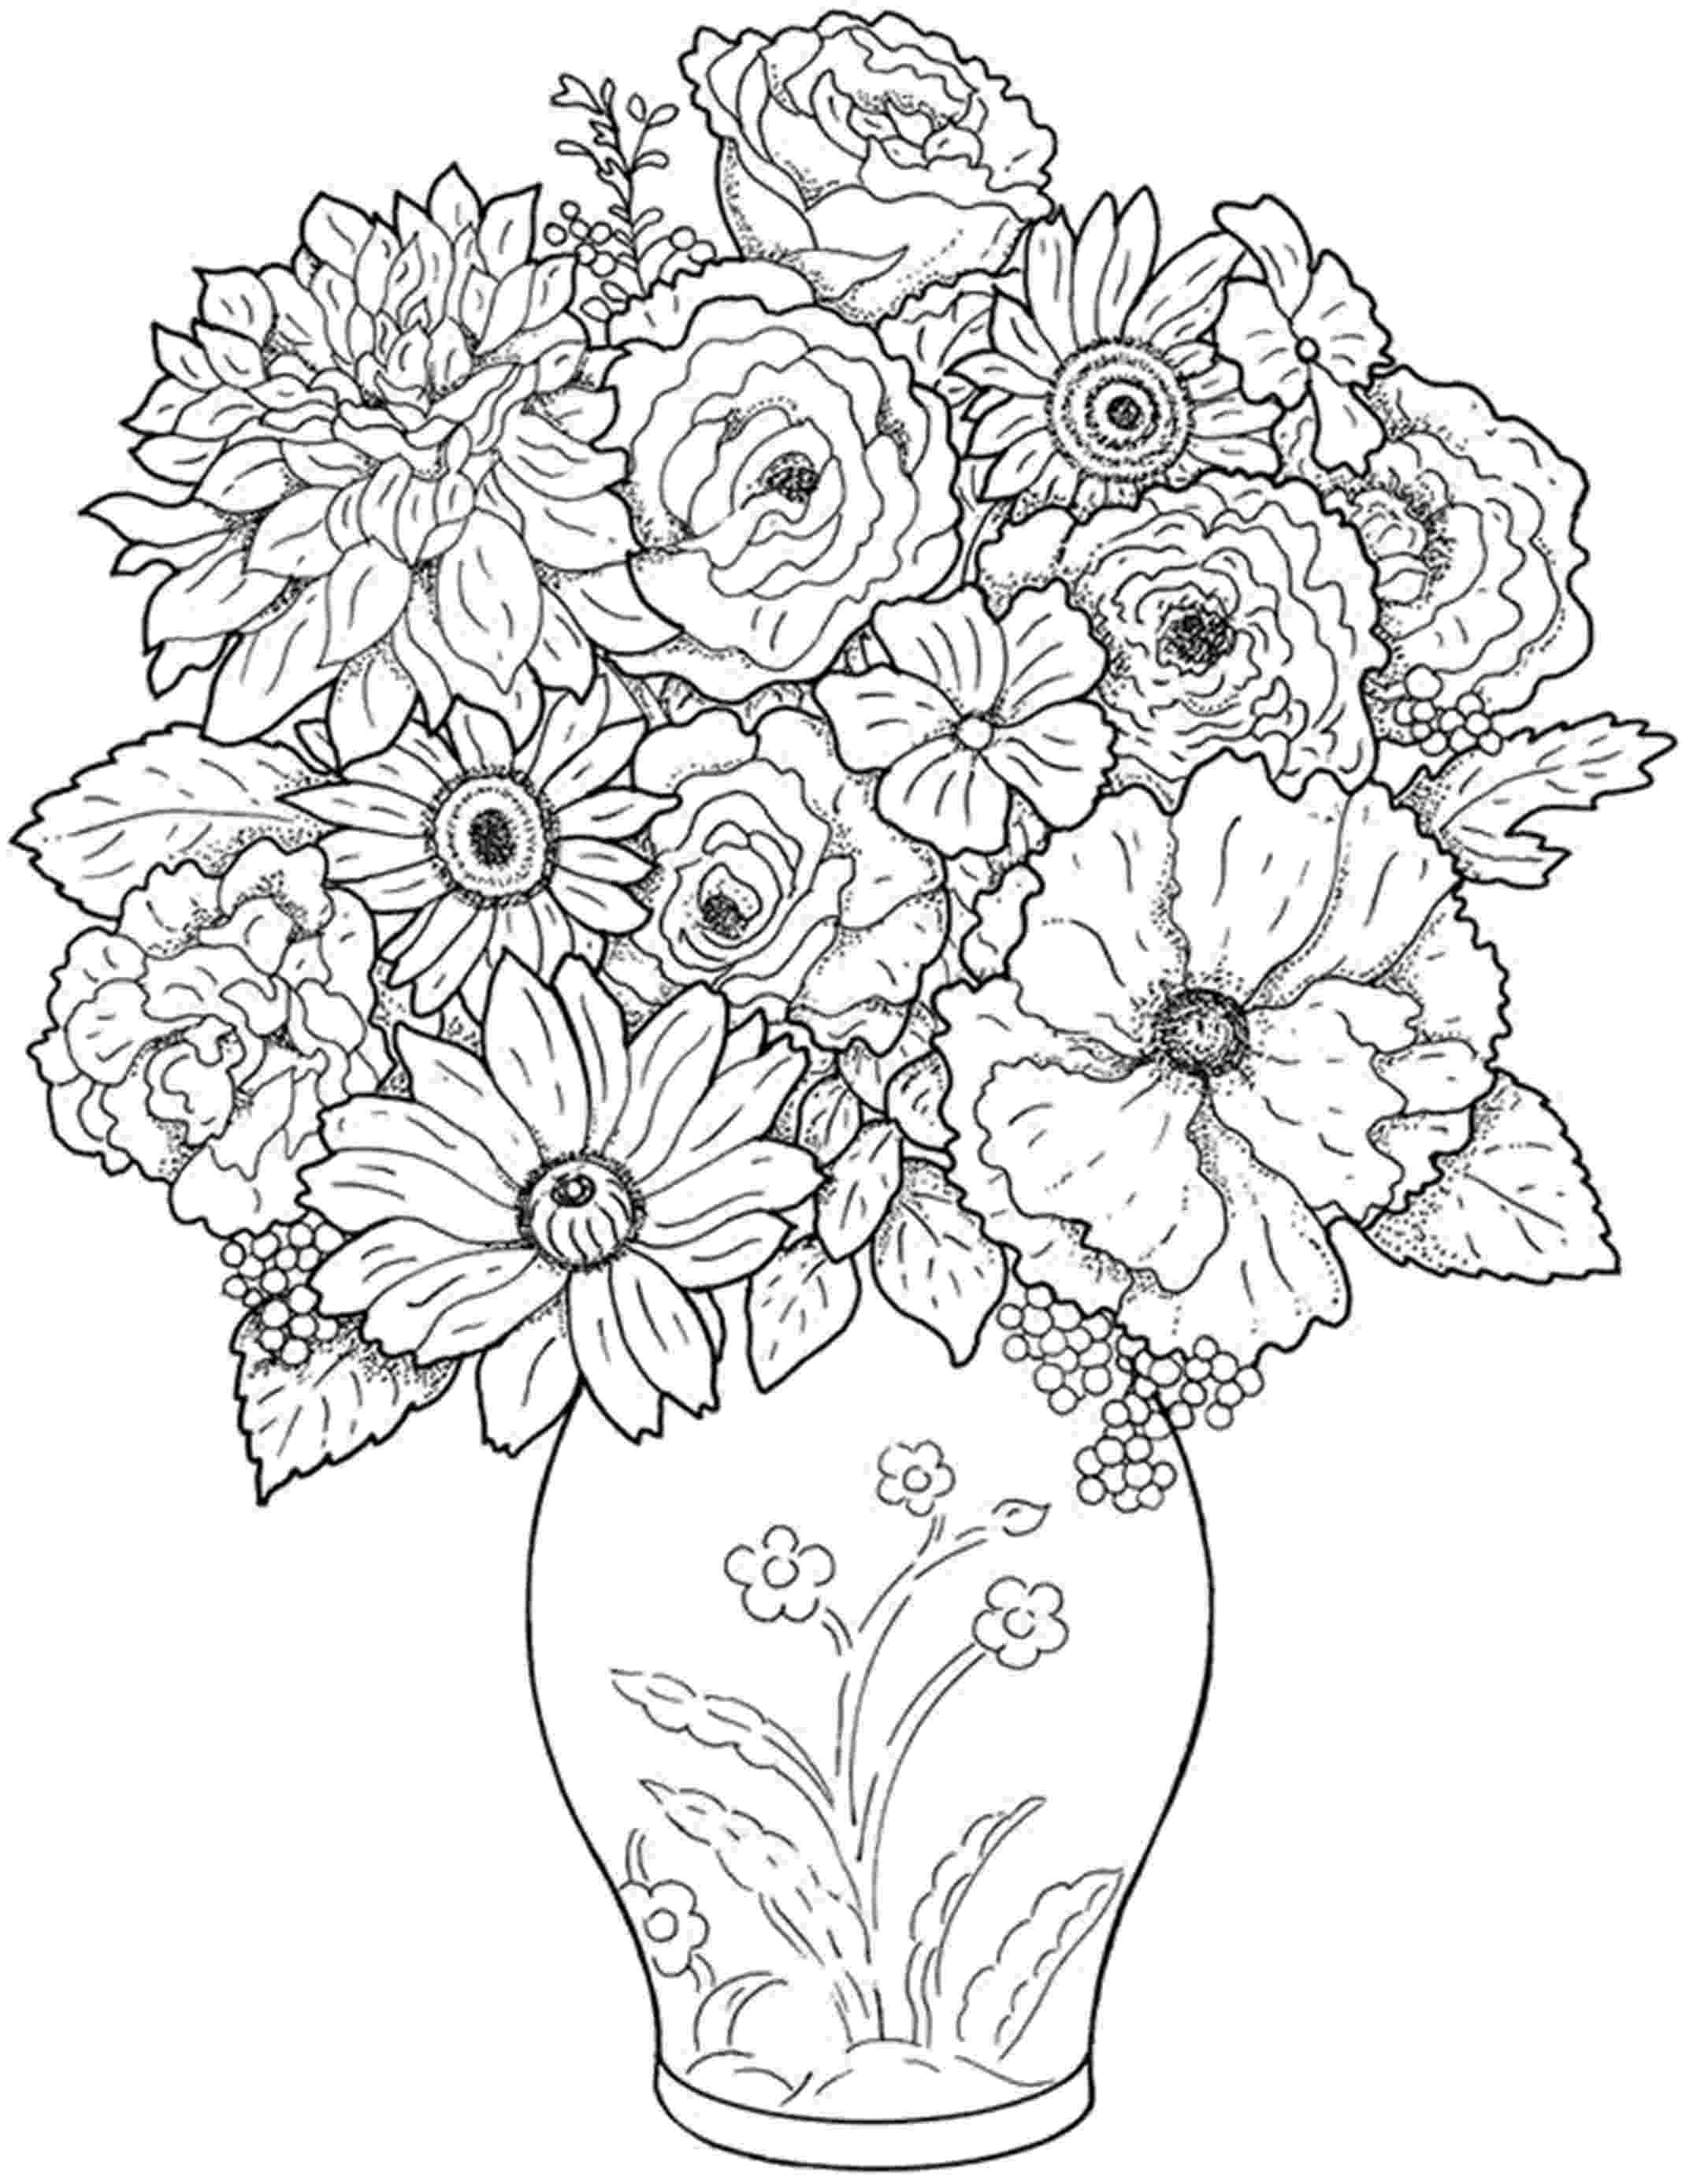 pictures of flowers to color free printables free printable flower coloring pages for kids cool2bkids color printables pictures to flowers free of 